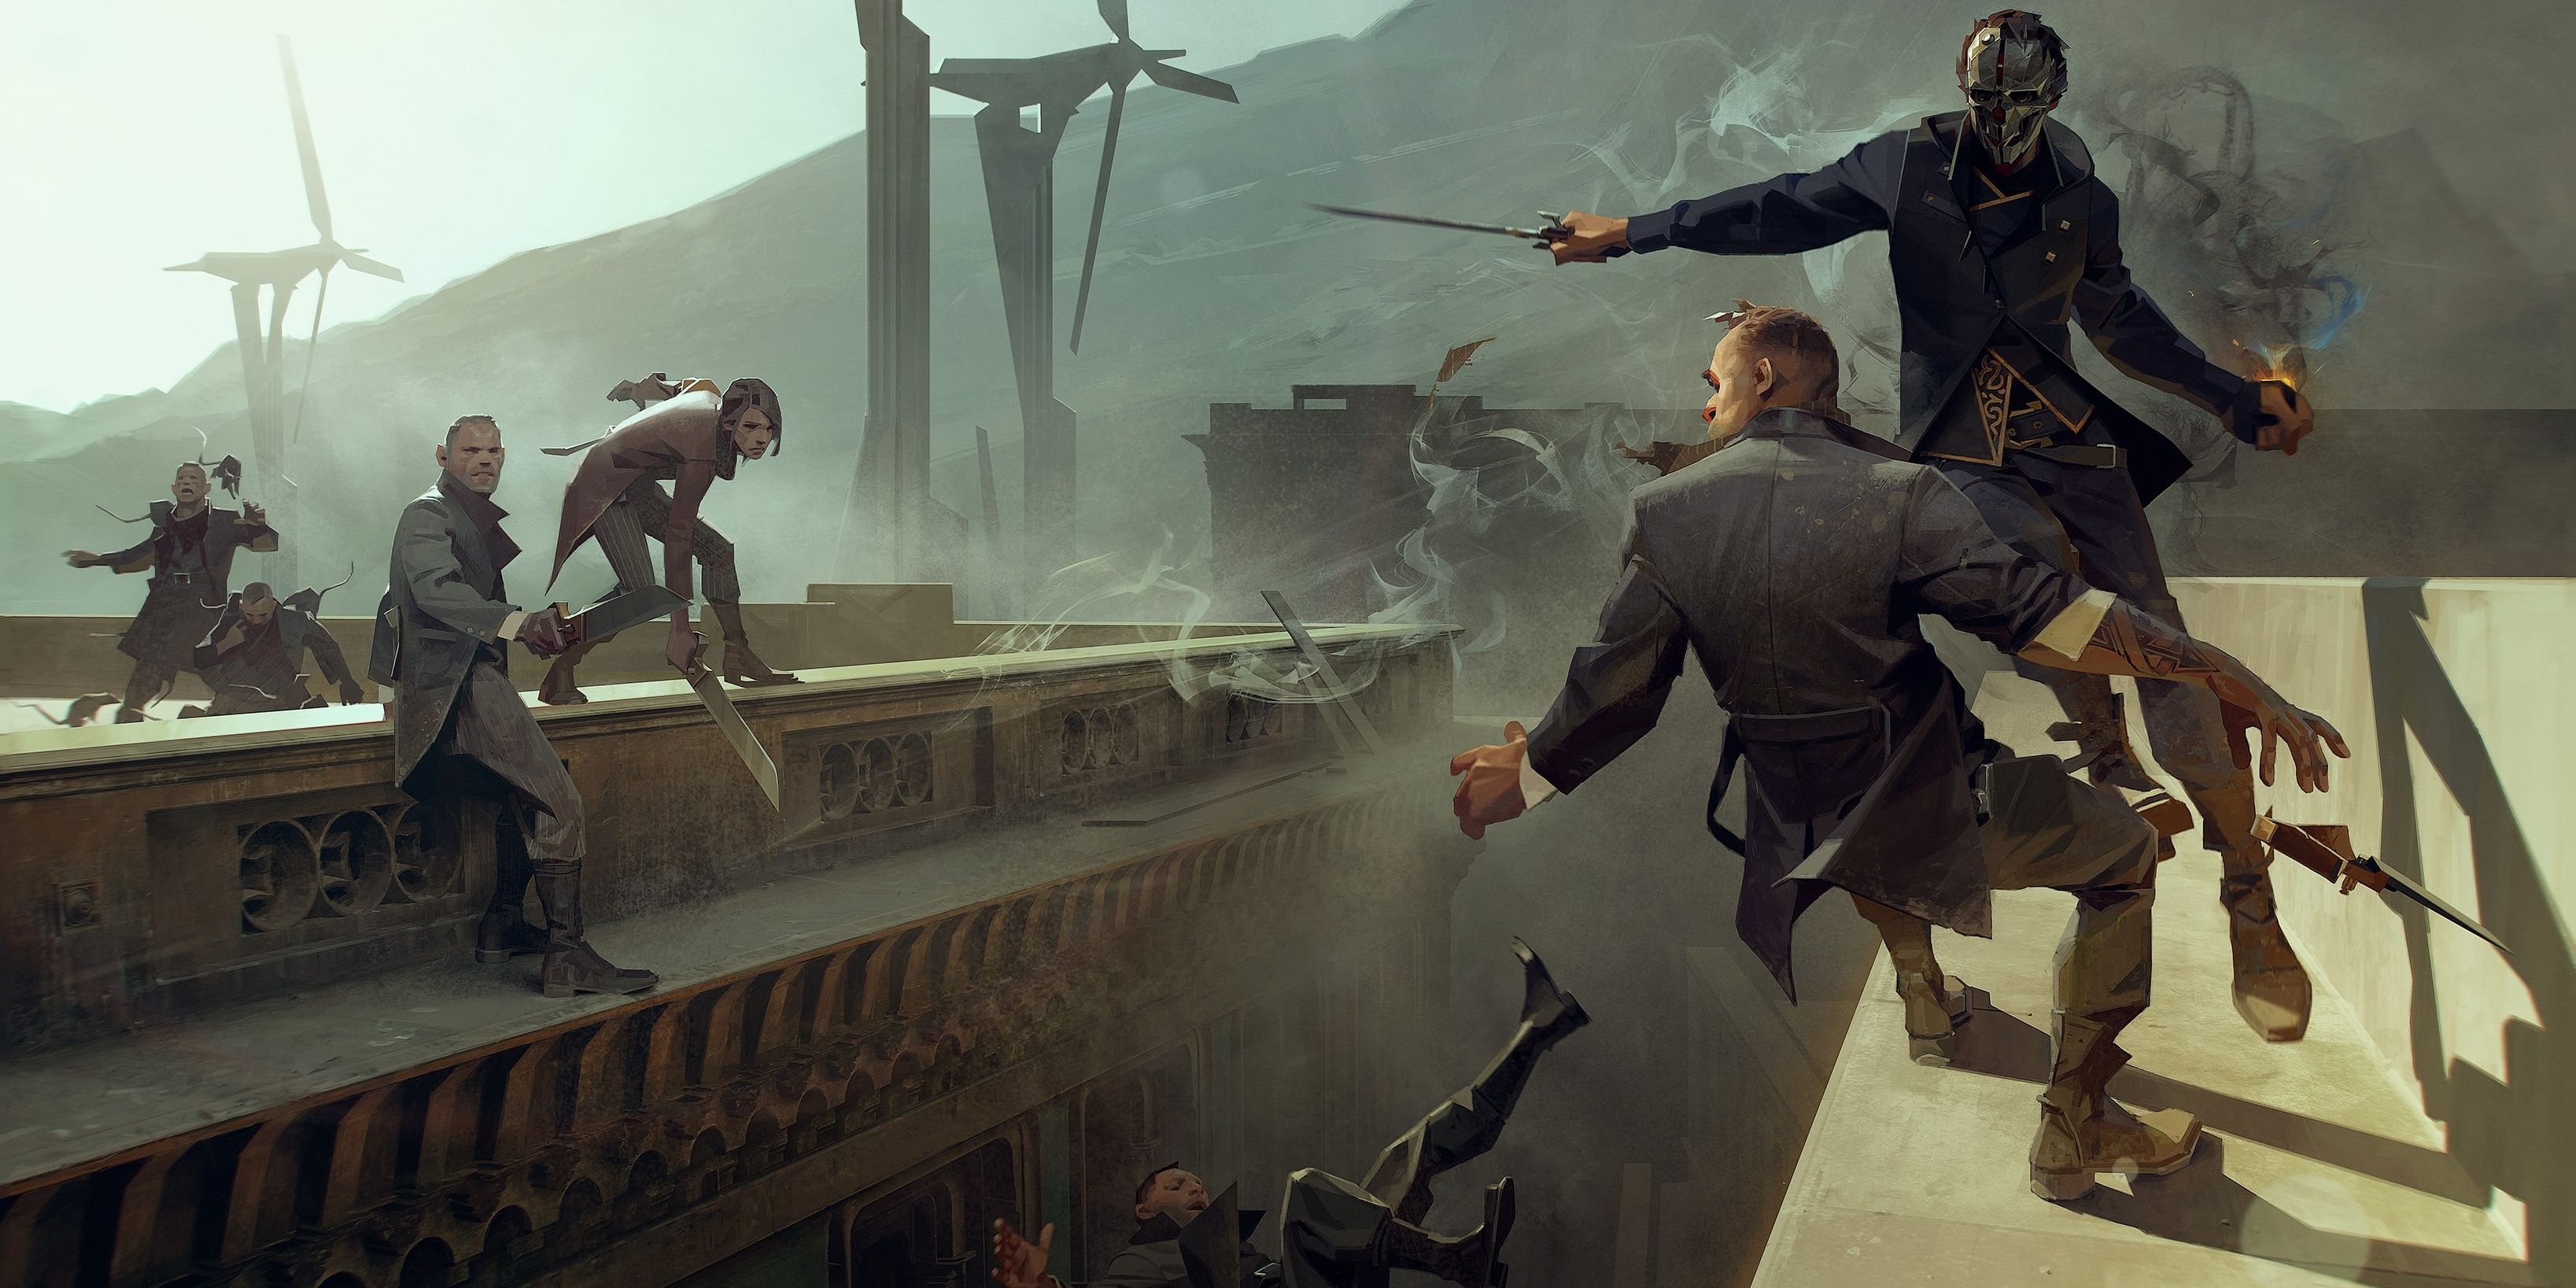 Concept art of Corvo and Emily fighting members of the Howlers gang on the rooftops of Karnaca